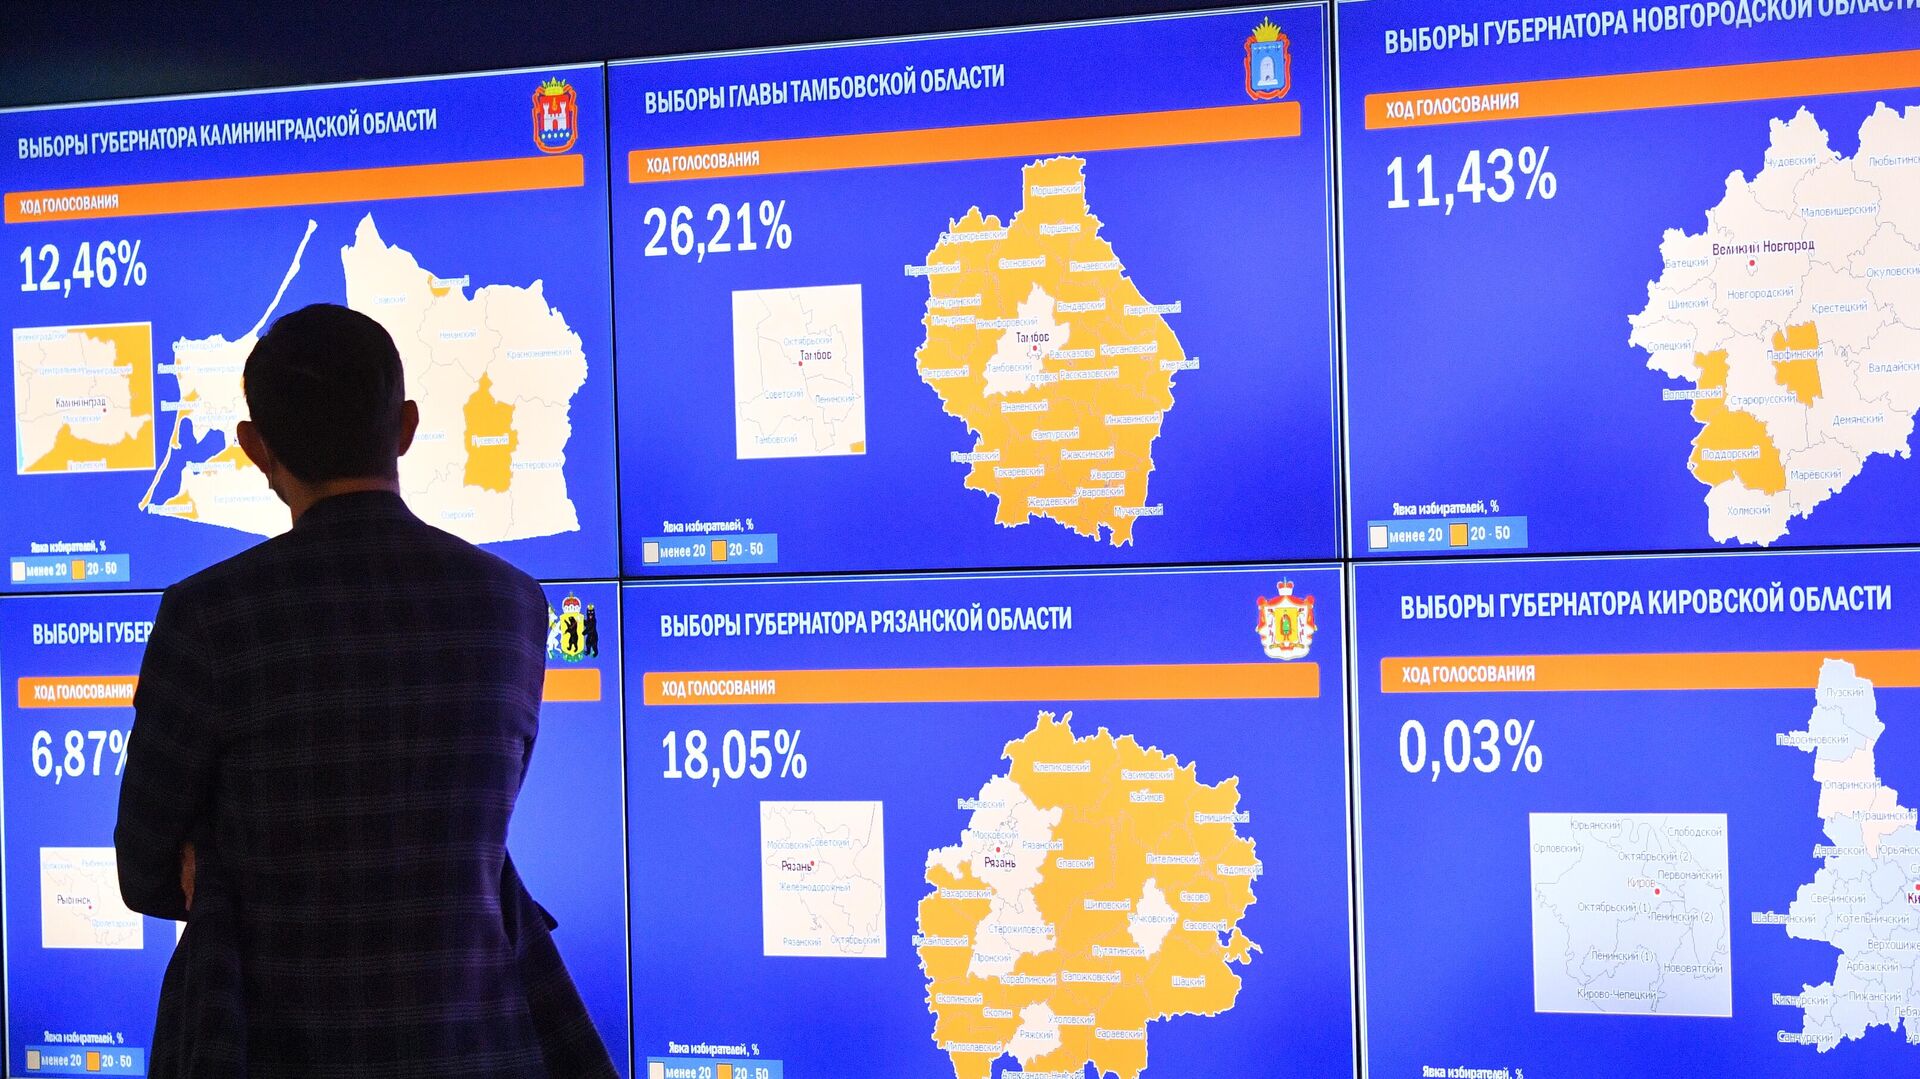 Tambov Region is the region with the highest turnout in the governorship elections